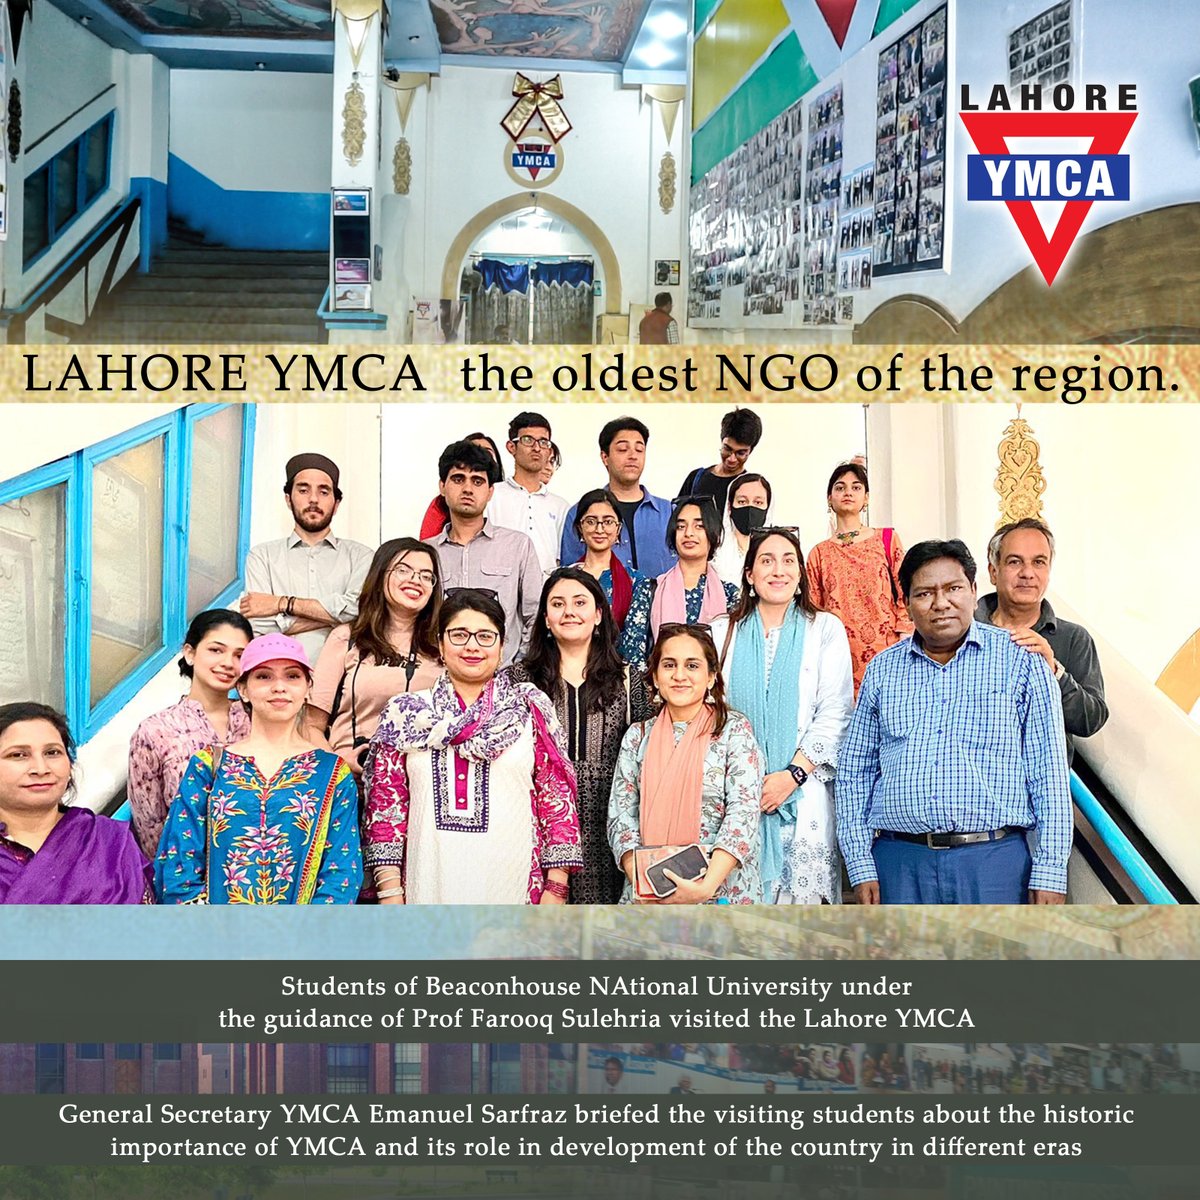 Students showed keen interest in the working of this organization that has been serving the communities since 1876 and is the oldest NGO of the region. 
#ymcalahore
#legacyoflight
#ymca
#communityservice
#youthdevelopment
#historicngo
#lahorehistory
#sportspioneers
#femaleempower